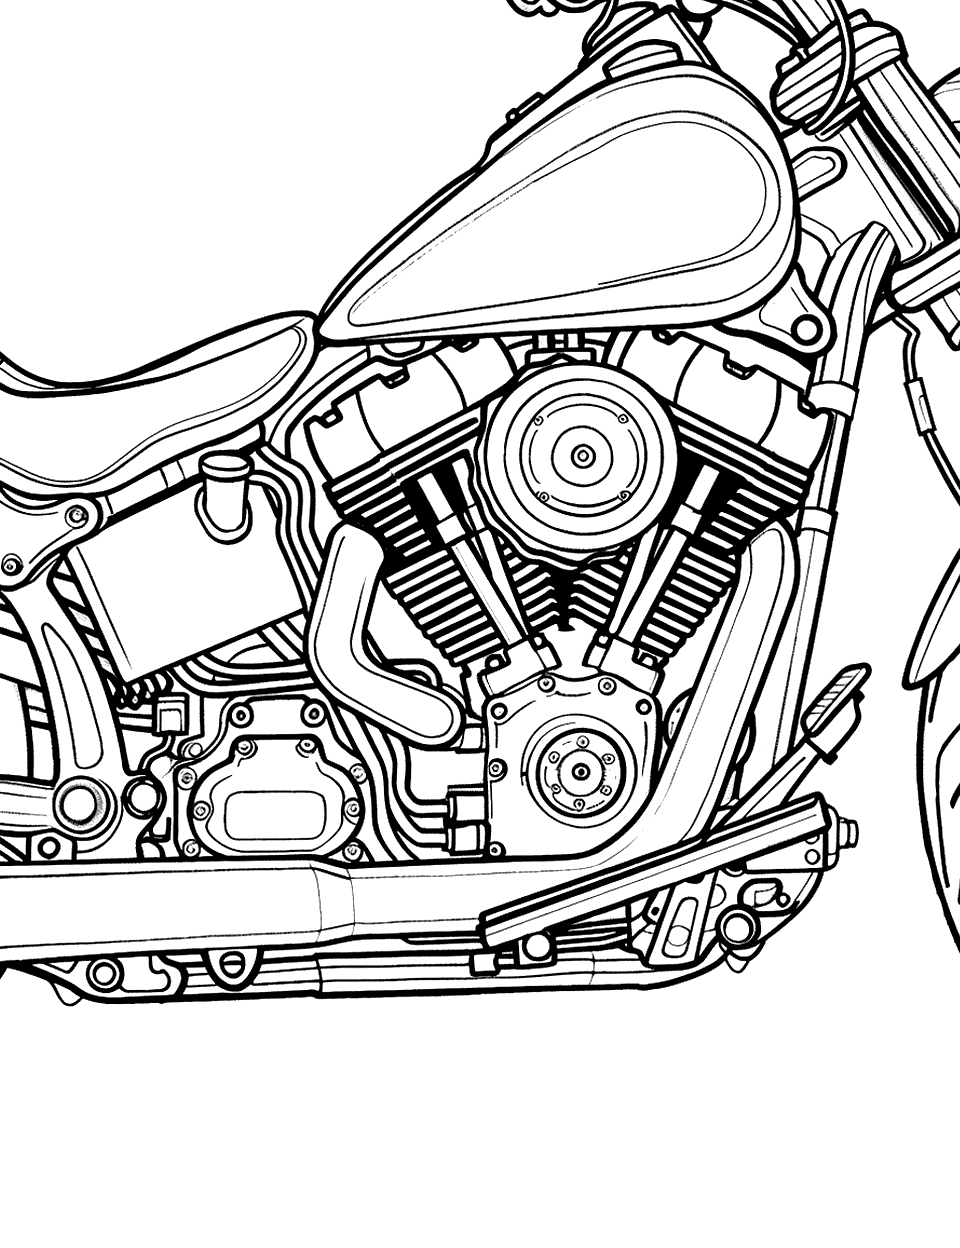 Detailed Motorcycle Engine Coloring Page - A close-up view of a detailed motorcycle engine for older kids to color.